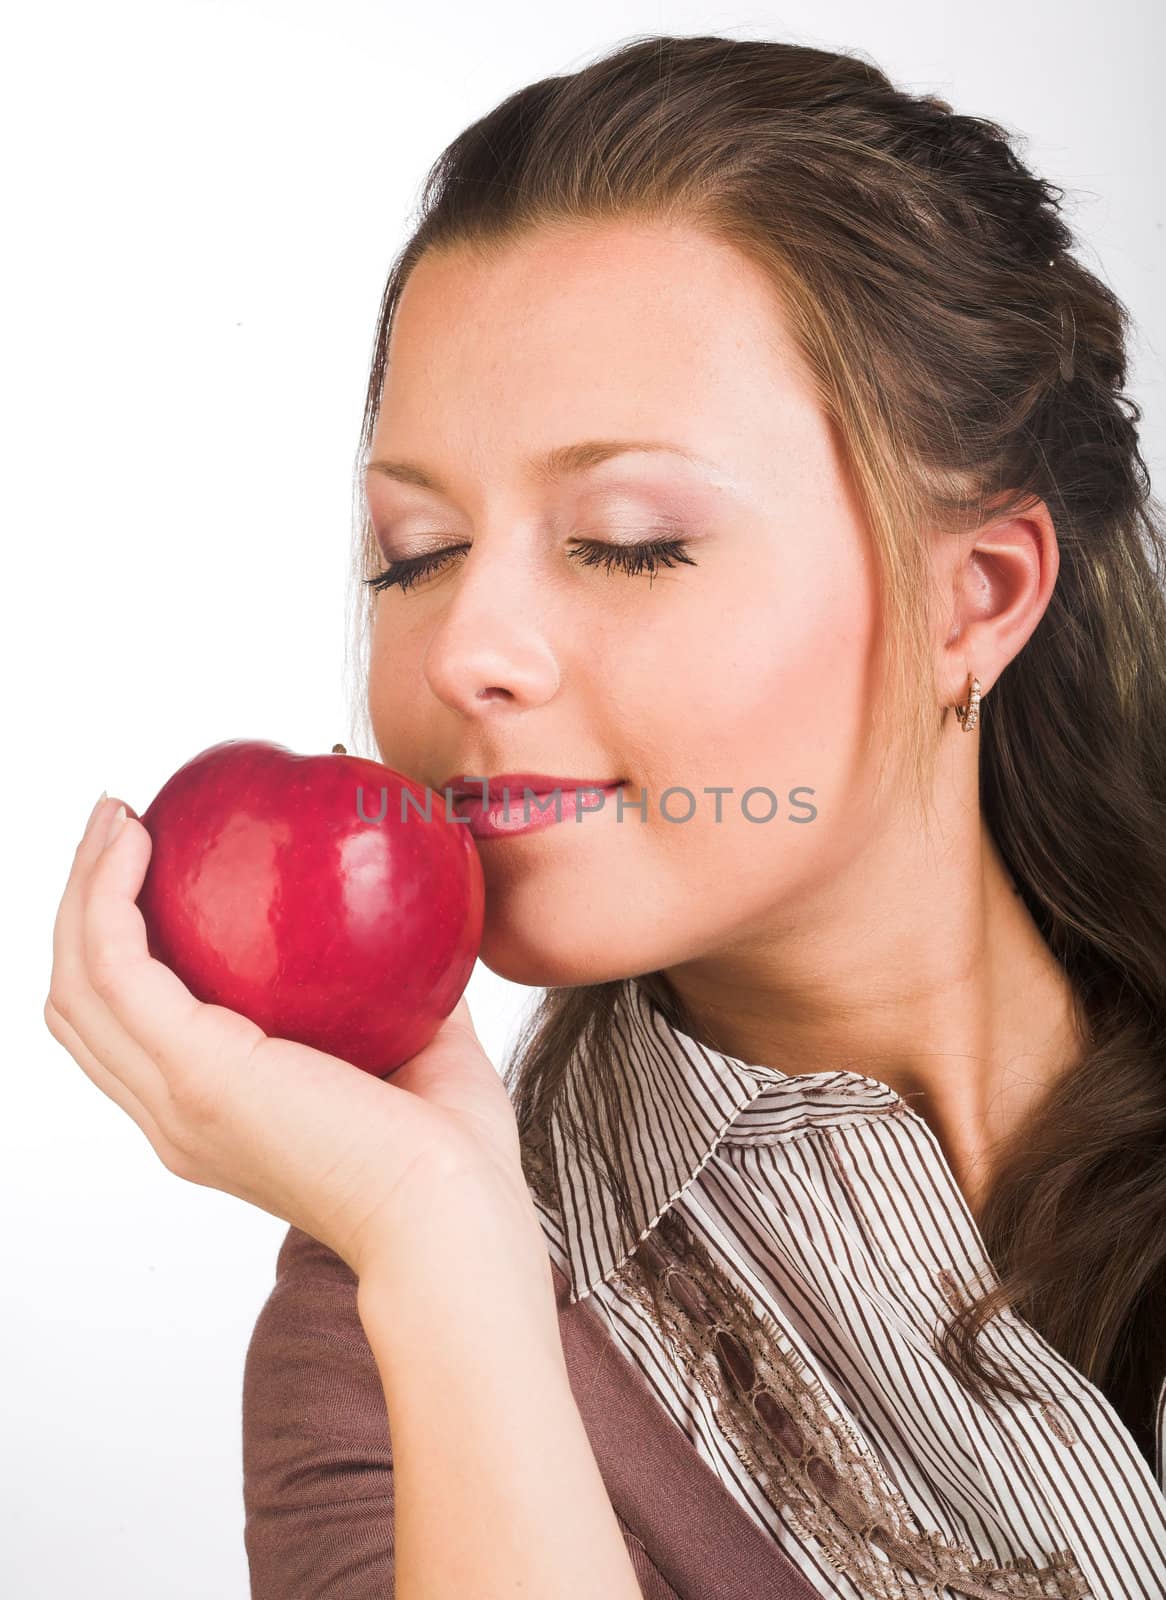  beautiful young smiling woman with red apple.
